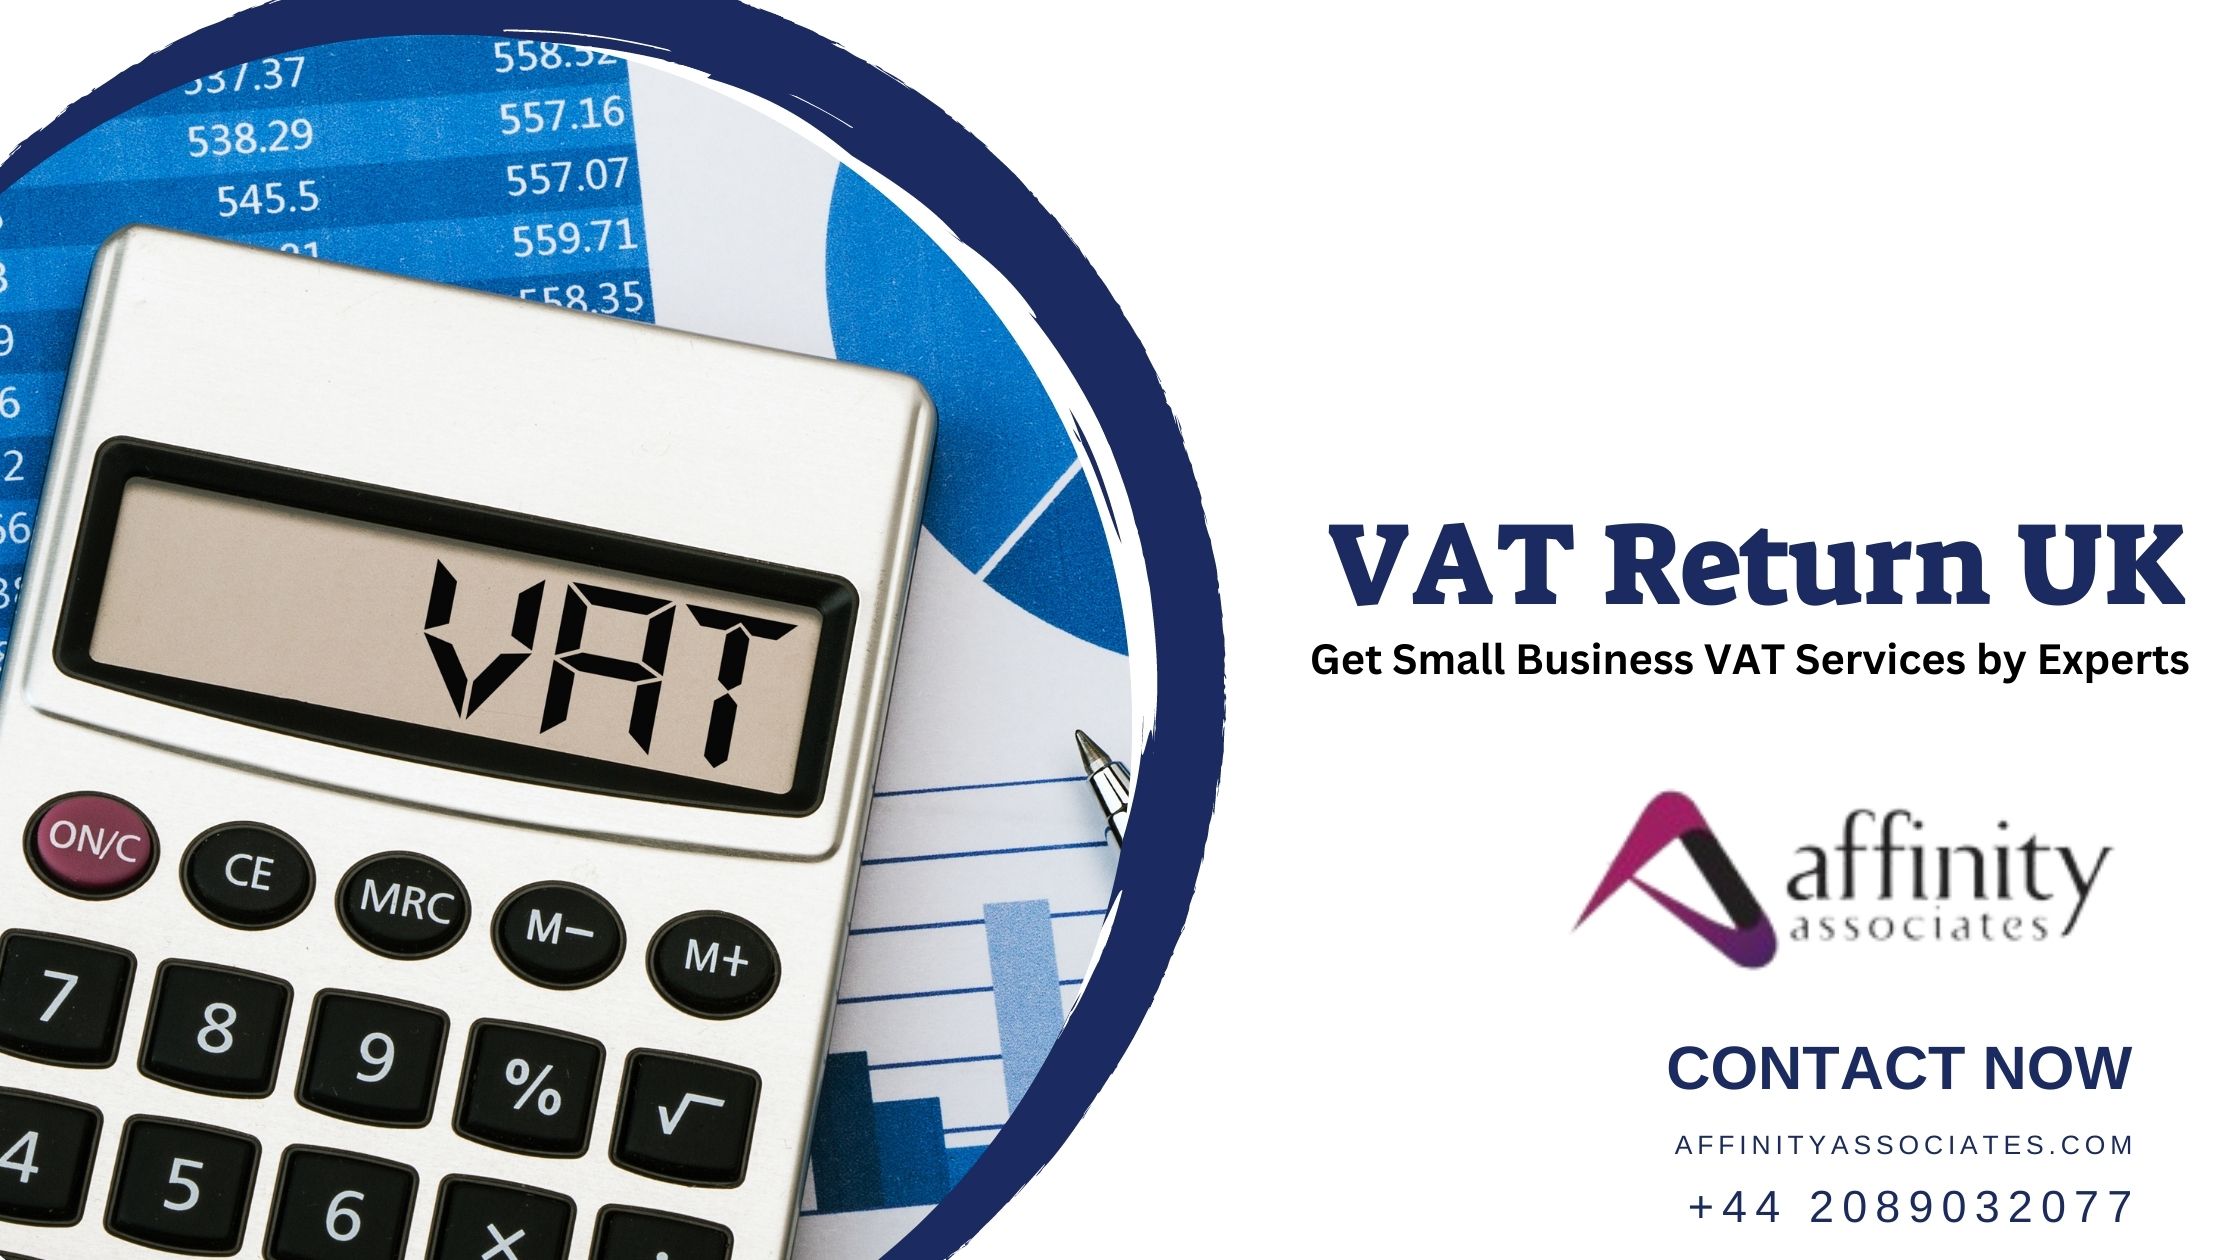 VAT Return UK – Small Business VAT Services by Experts